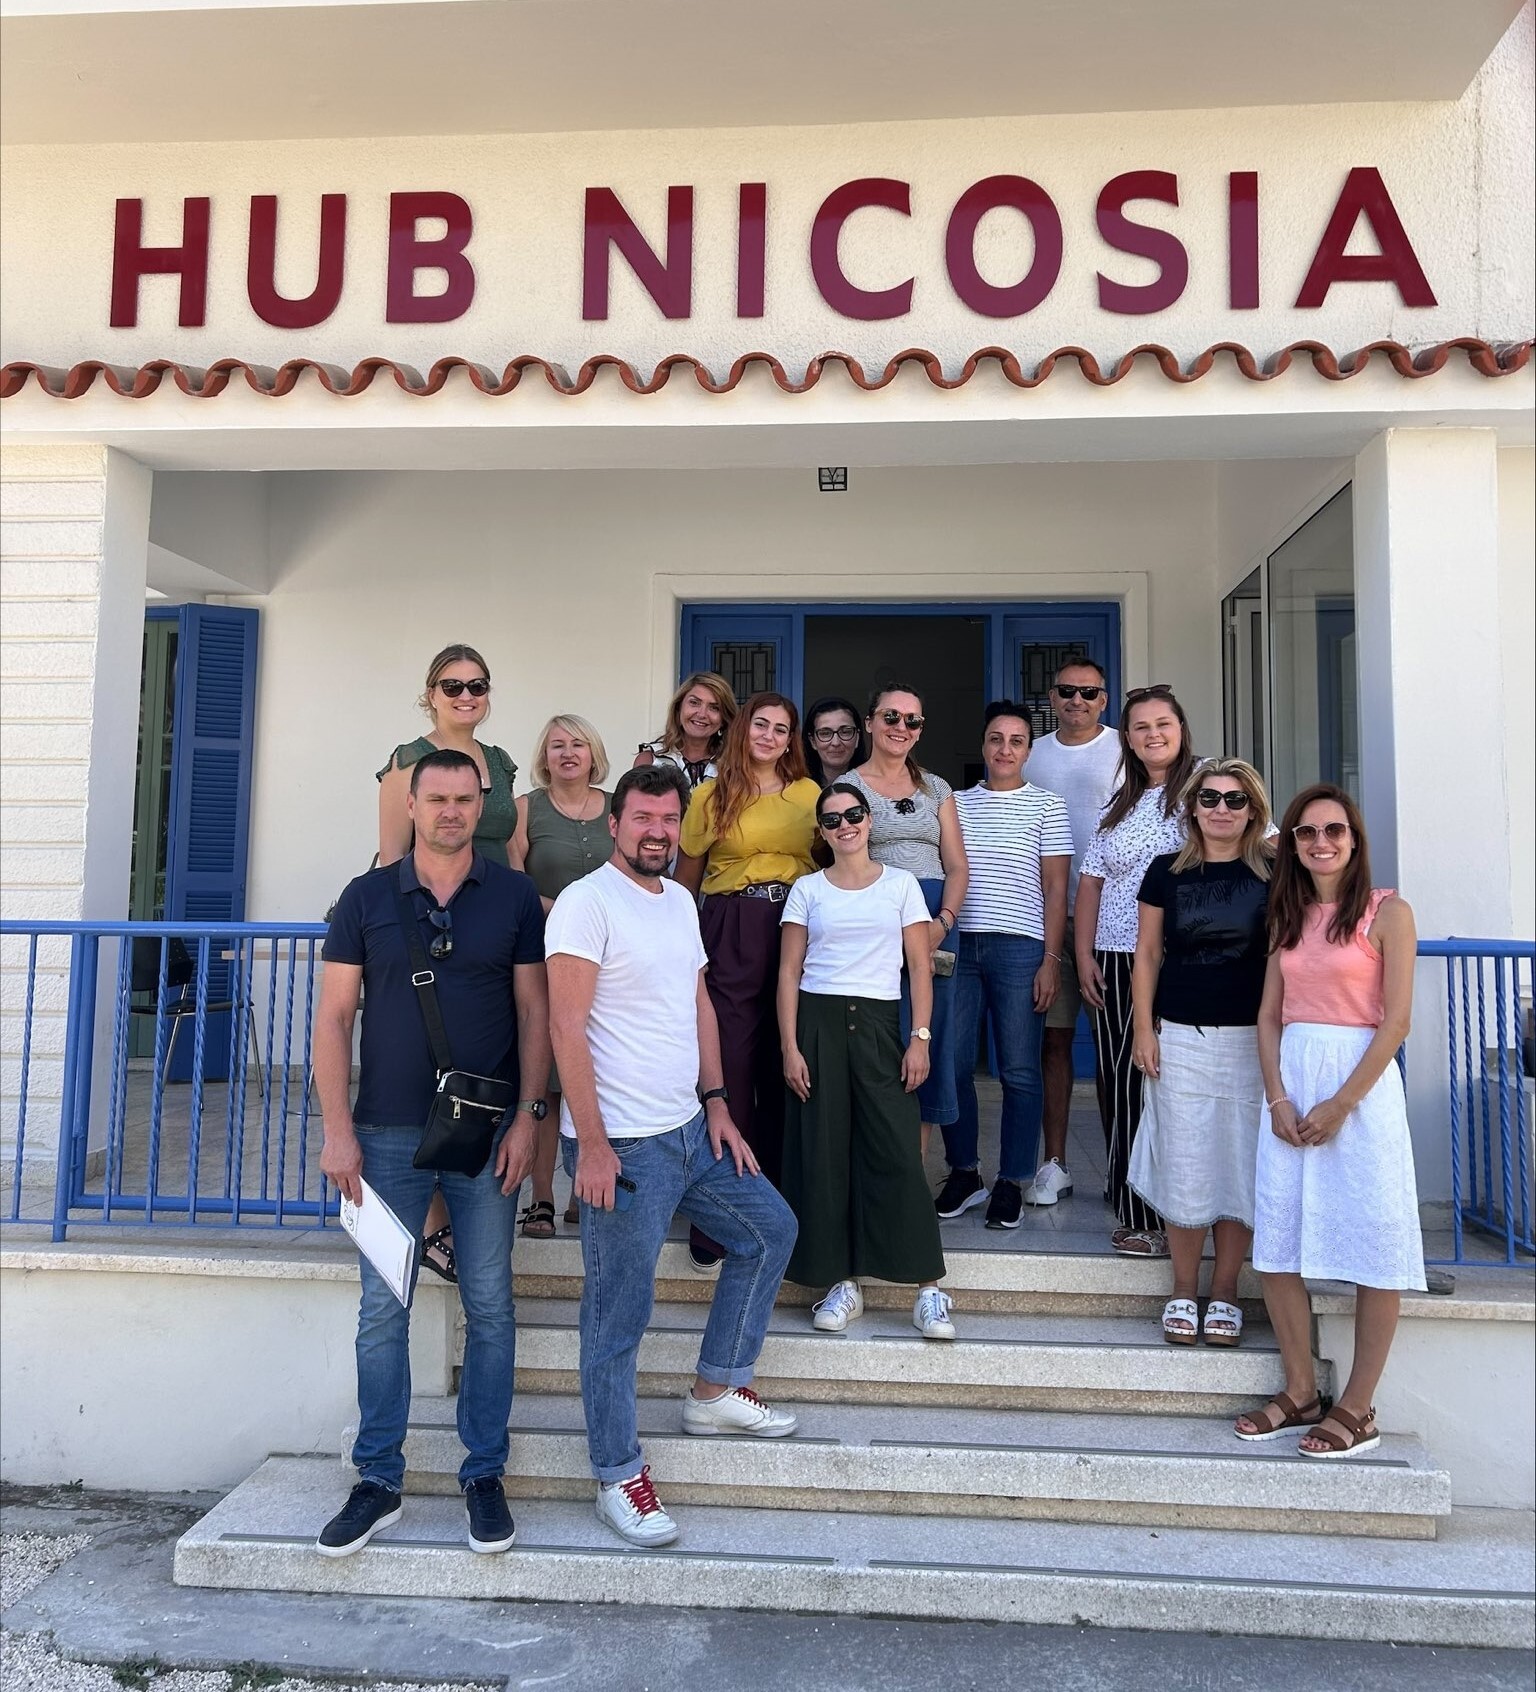 4th BC4ESE team meeting was successfully held in Nicosia